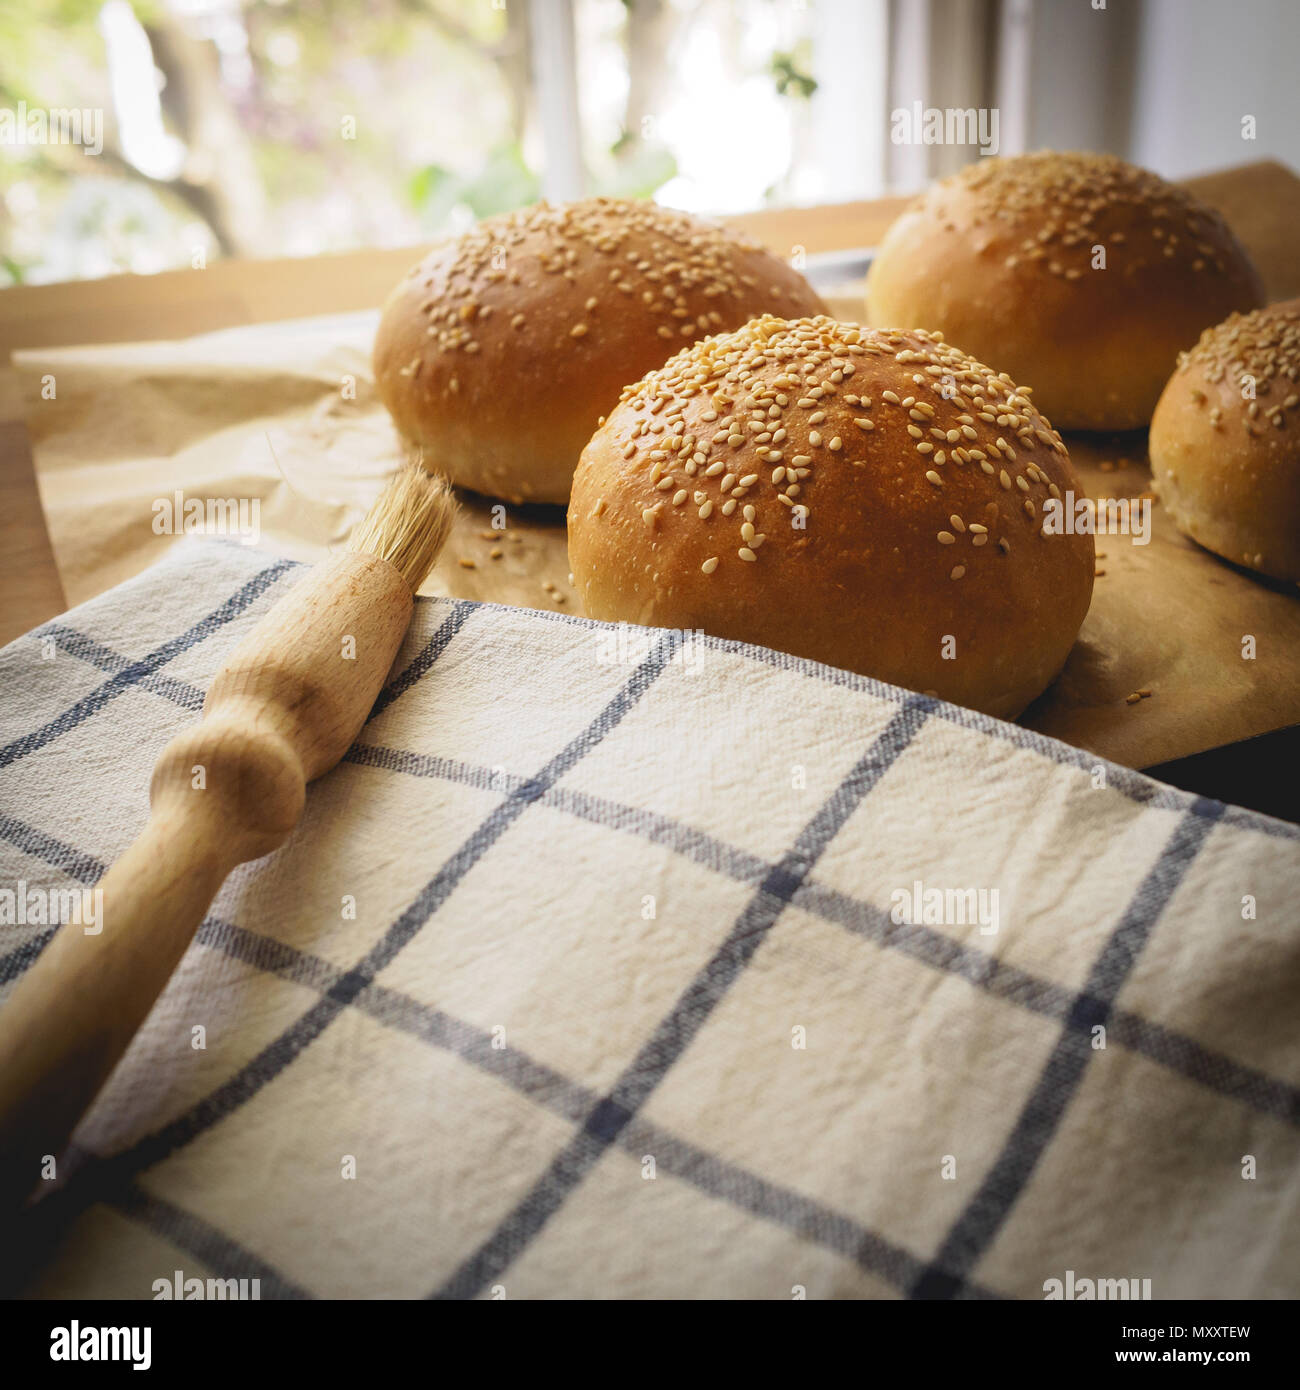 Top view of homemade sesame buns on a wooden chopping board with a striped white kitchen cloth and a pastry brush. Square format. Stock Photo